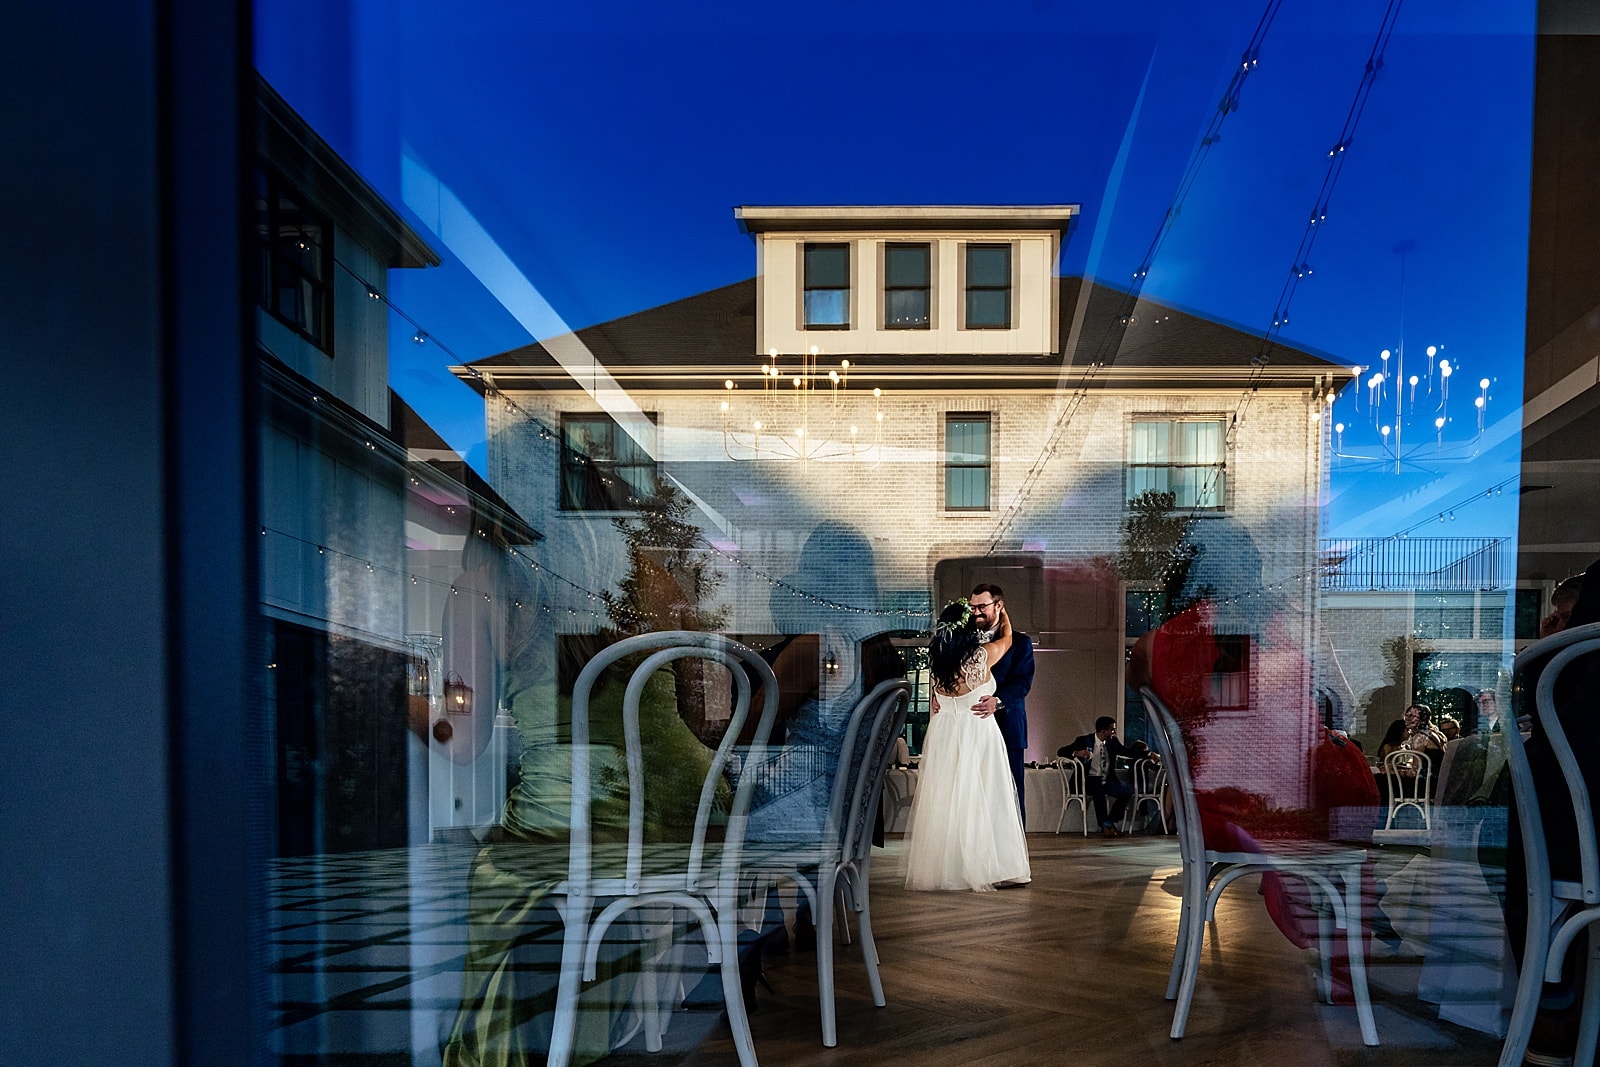 Bride & groom's first dance in The Bradford wedding ballroom. The main house is reflected in the window